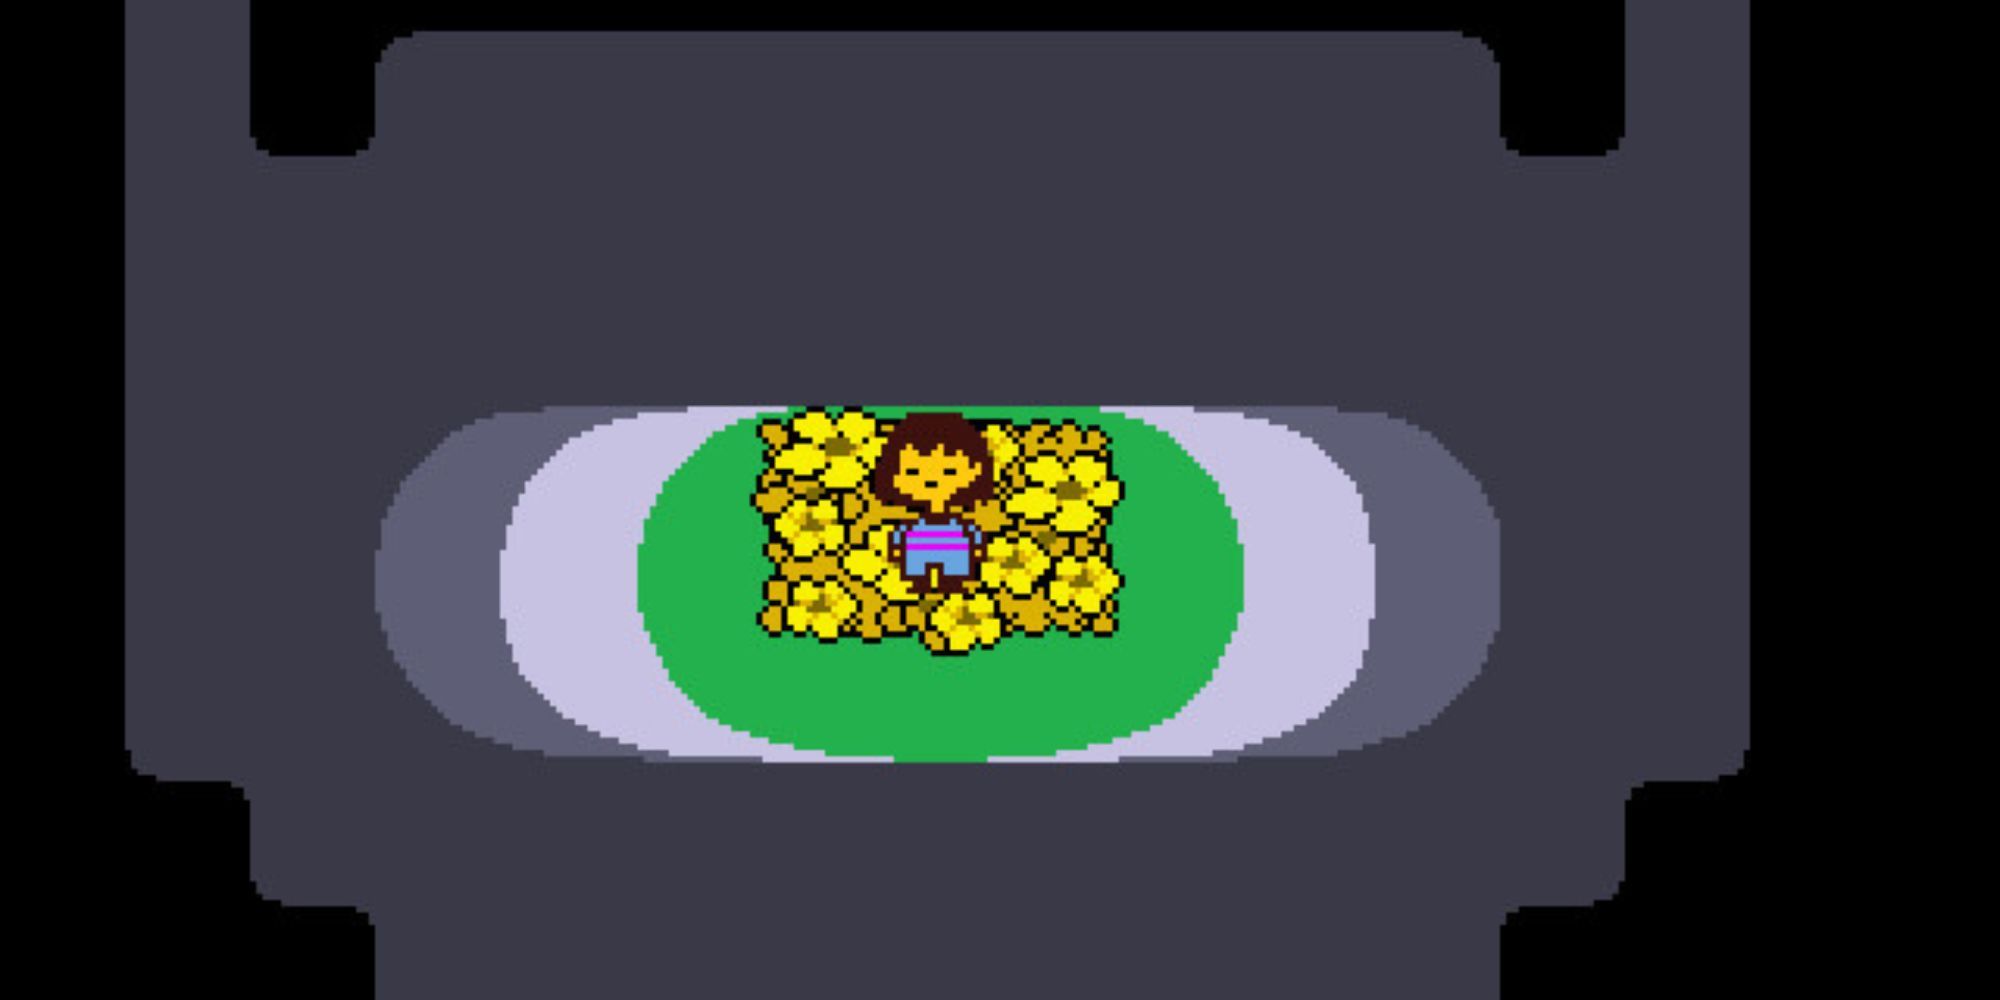 The player lying in a bed of flowers in Undertale